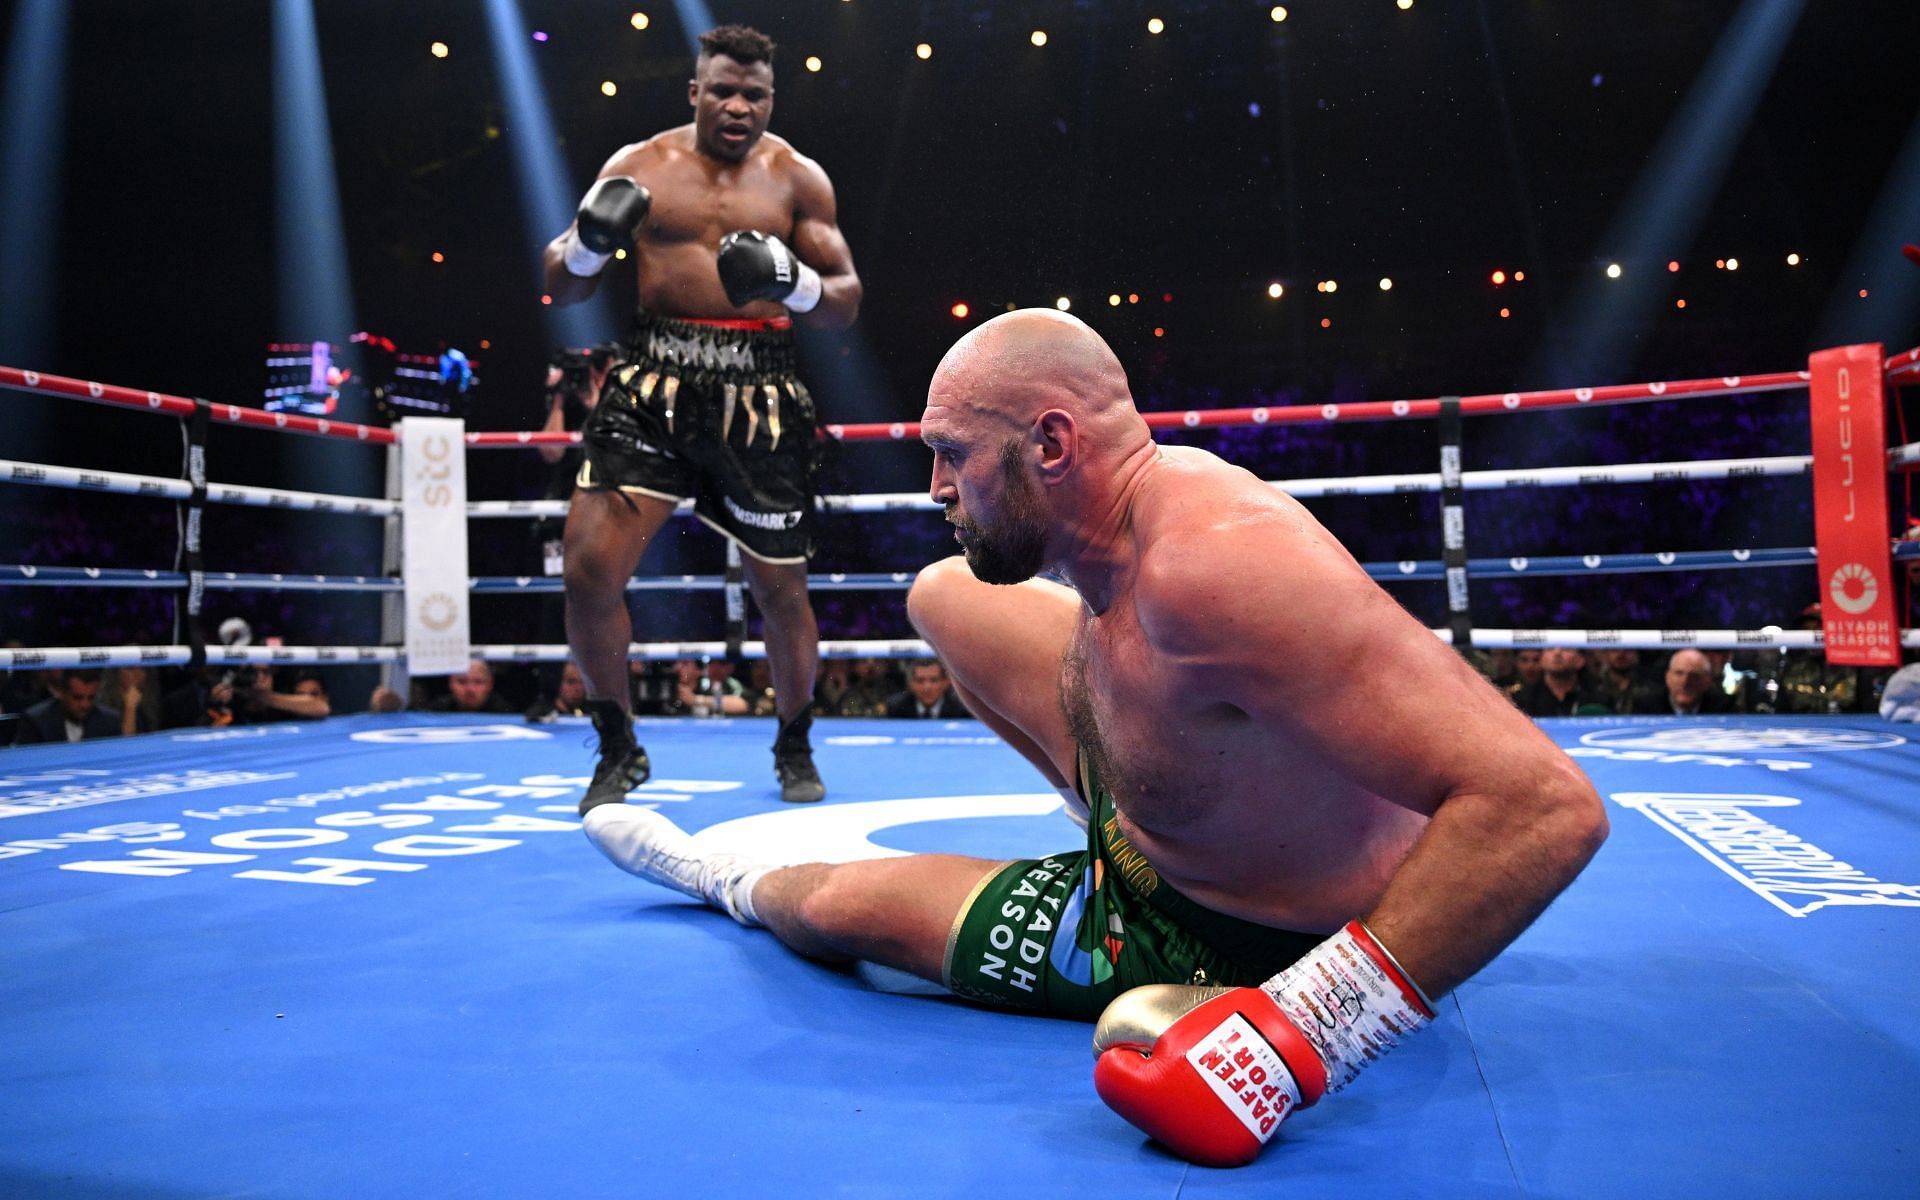 The lone knockdown of the Tyson Fury vs. Francis Ngannou boxing match was scored by the former UFC star [Image courtesy: Getty Images]